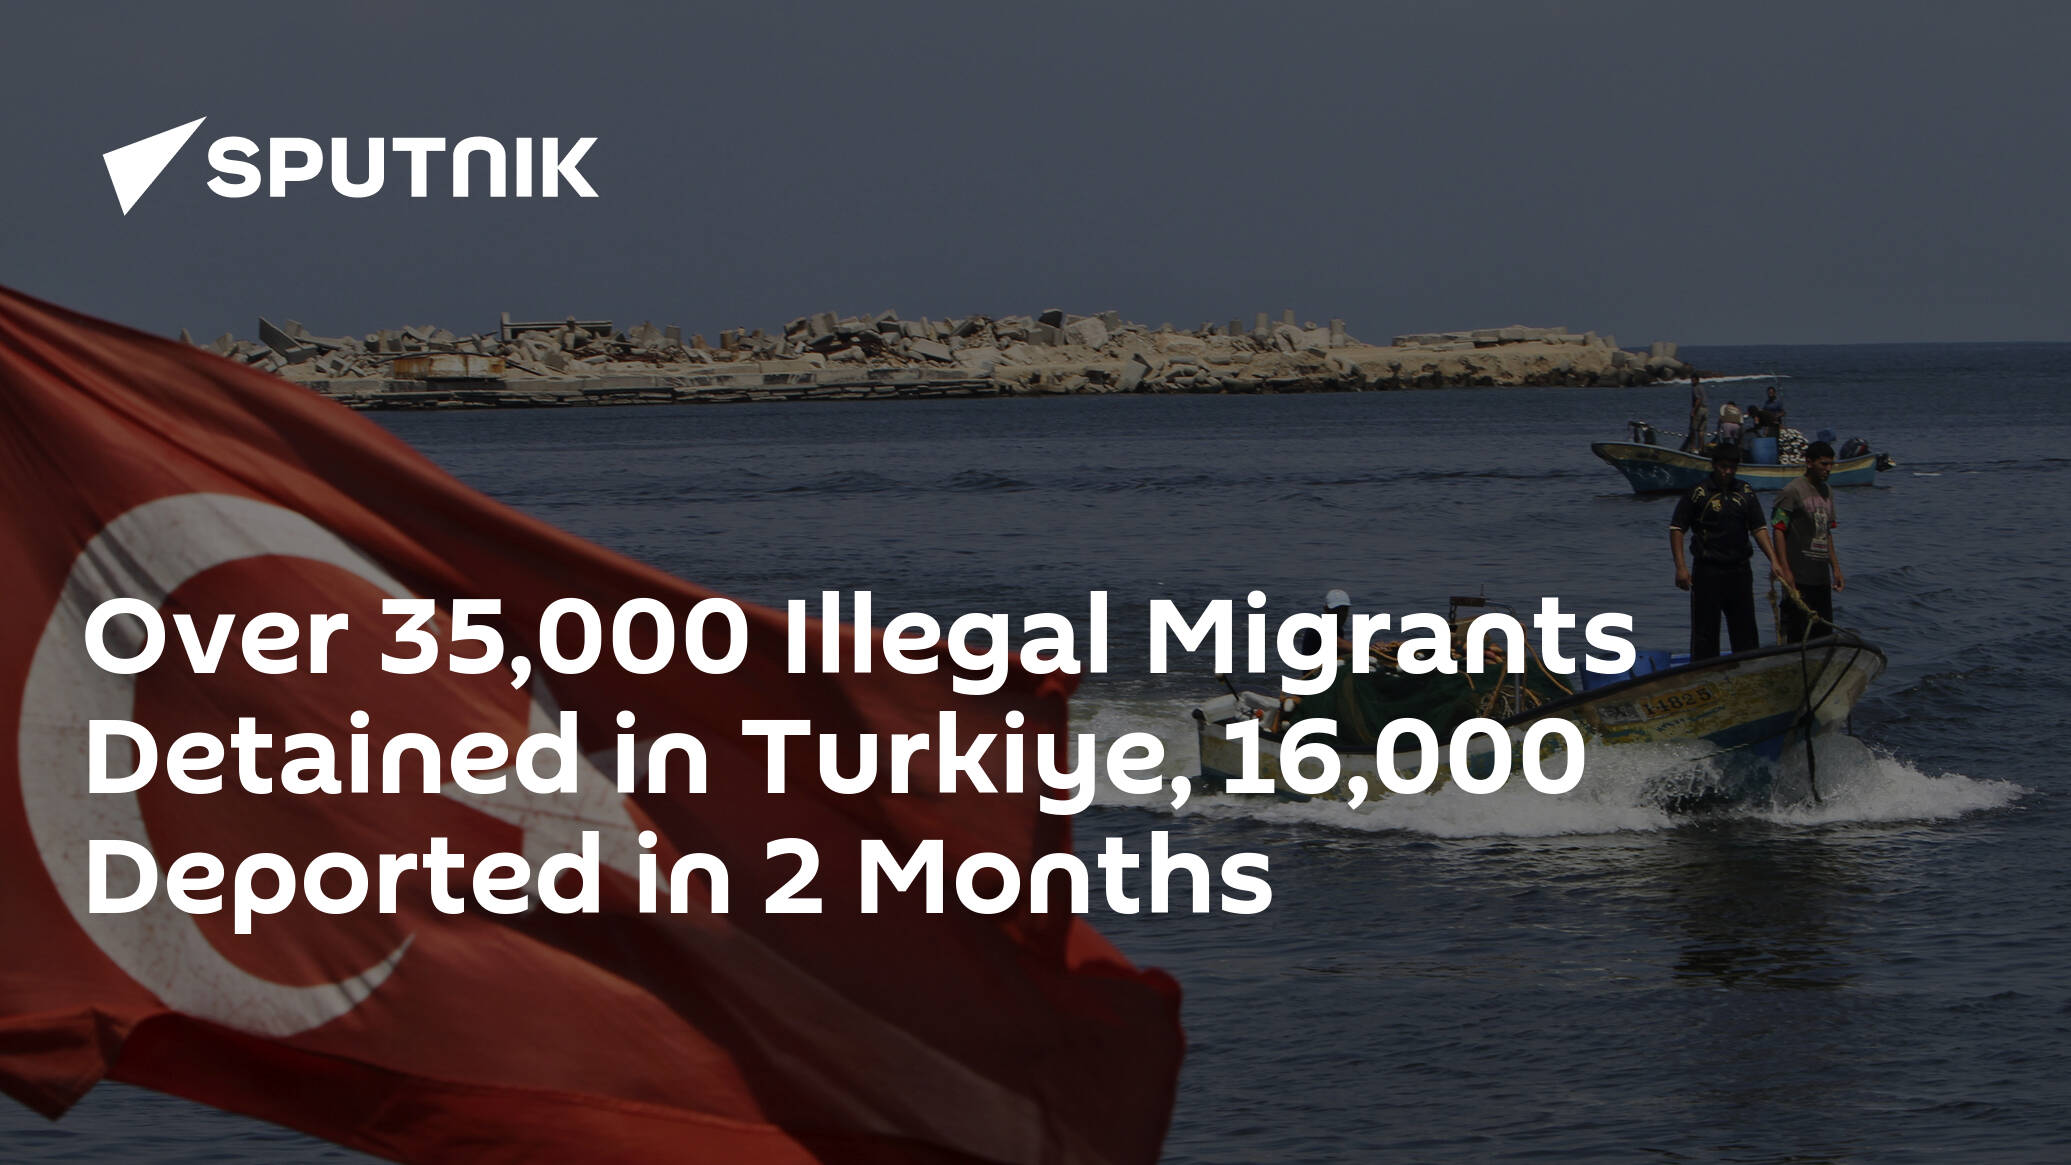 Over 35,000 Illegal Migrants Detained in Turkiye, 16,000 Deported in 2 Months